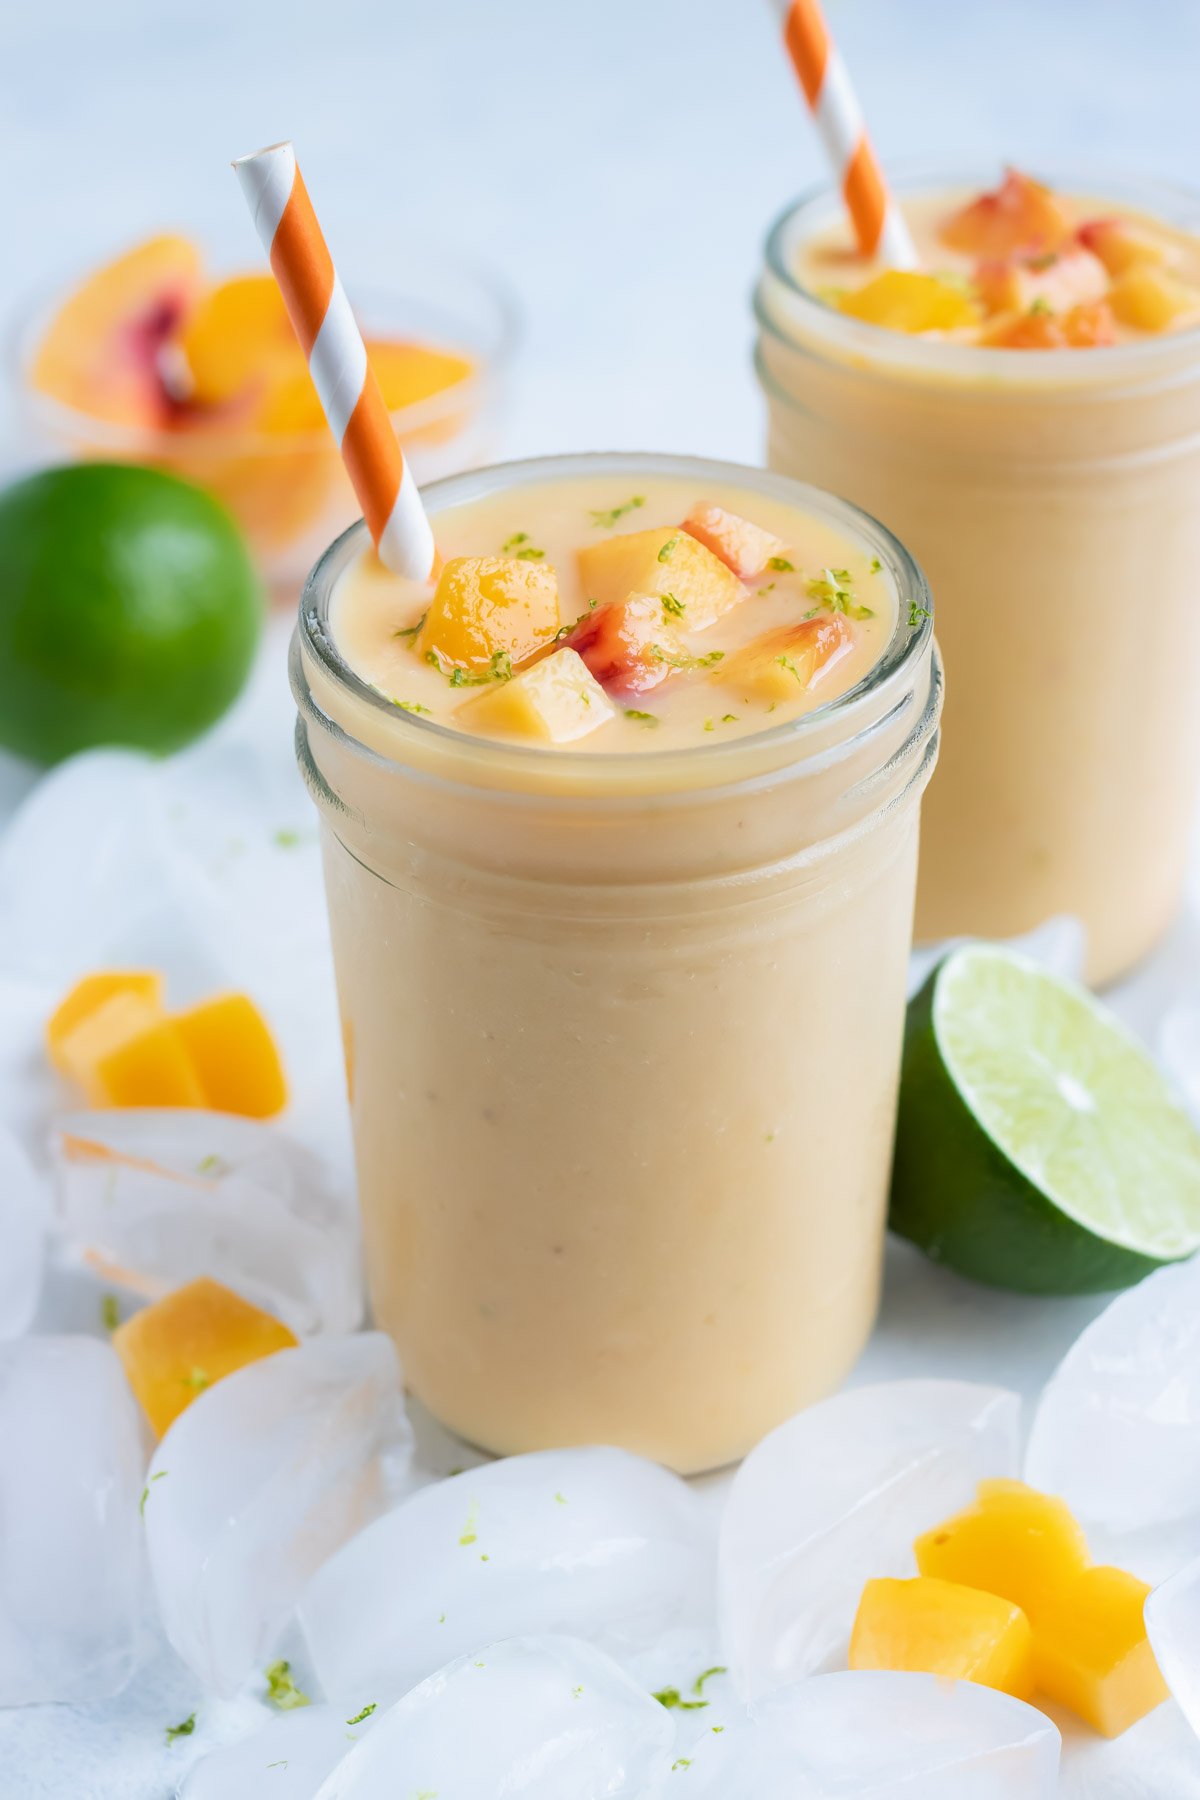 Two glasses are used to hold a thick and creamy peach smoothie.